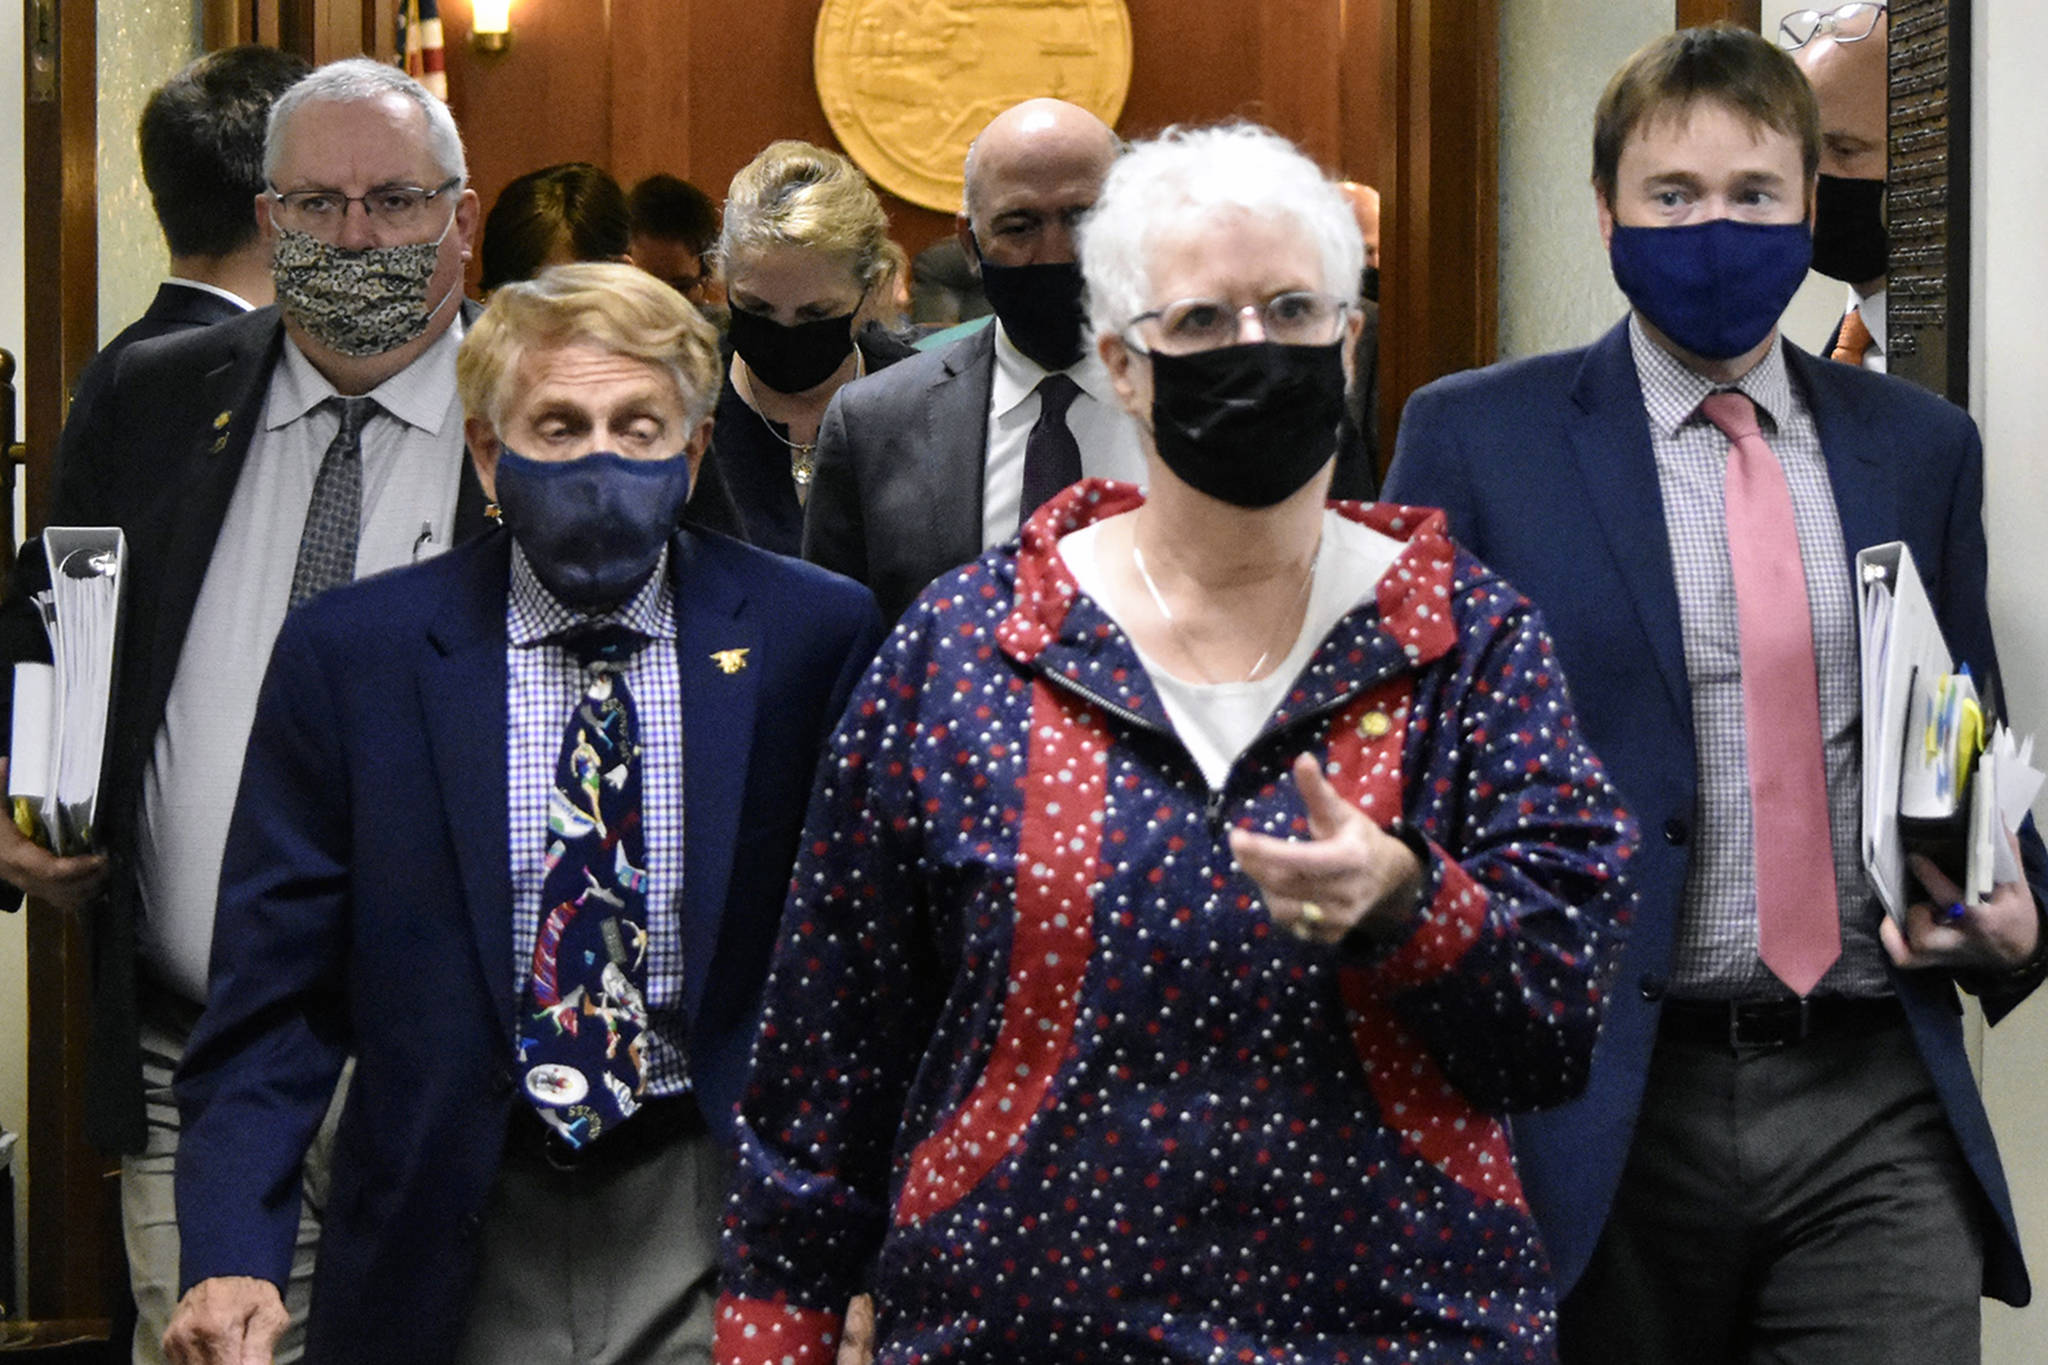 Peter Segall / Juneau Empire
House Speaker Louise Stutes, R-Kodiak, center, leaves the House chambers on Tuesday, Aug. 31, 2021 following marathon floor sessions that morning and Monday night. The House passed an appropriations bill but not before members of the minority voiced deep objections.